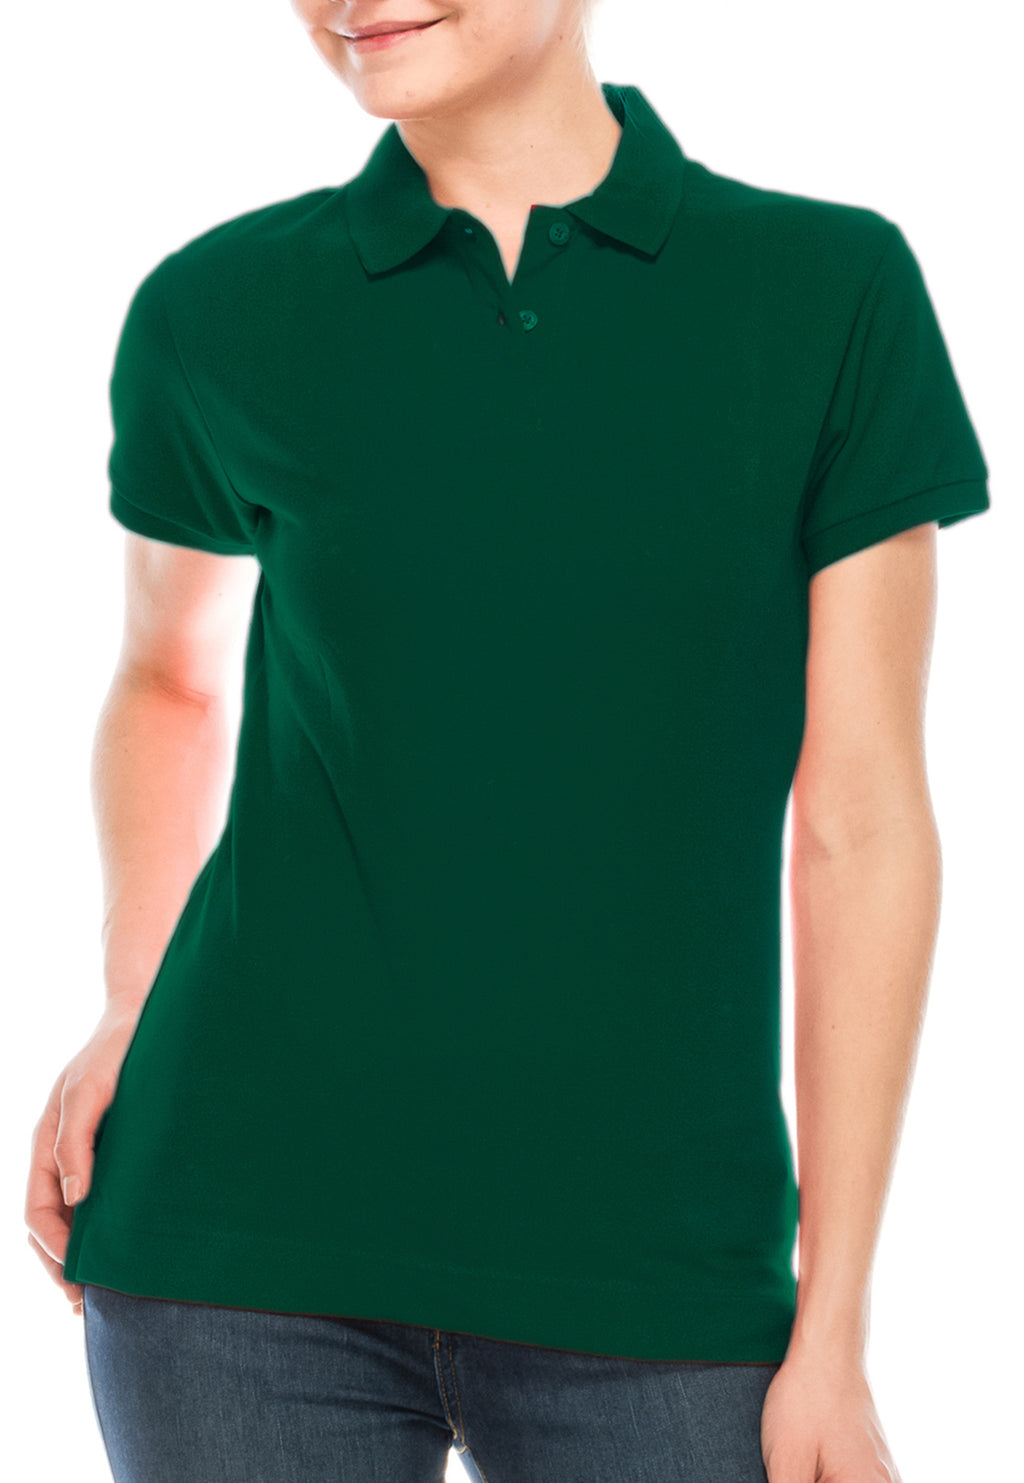 Girls Junior Dark green Polo Classic: Stylish collared design. Sizes S-XL. Colors: White, Black, Navy, and many more. Fabric: 95% Cotton/5% Spandex. Style: SSPO93J."